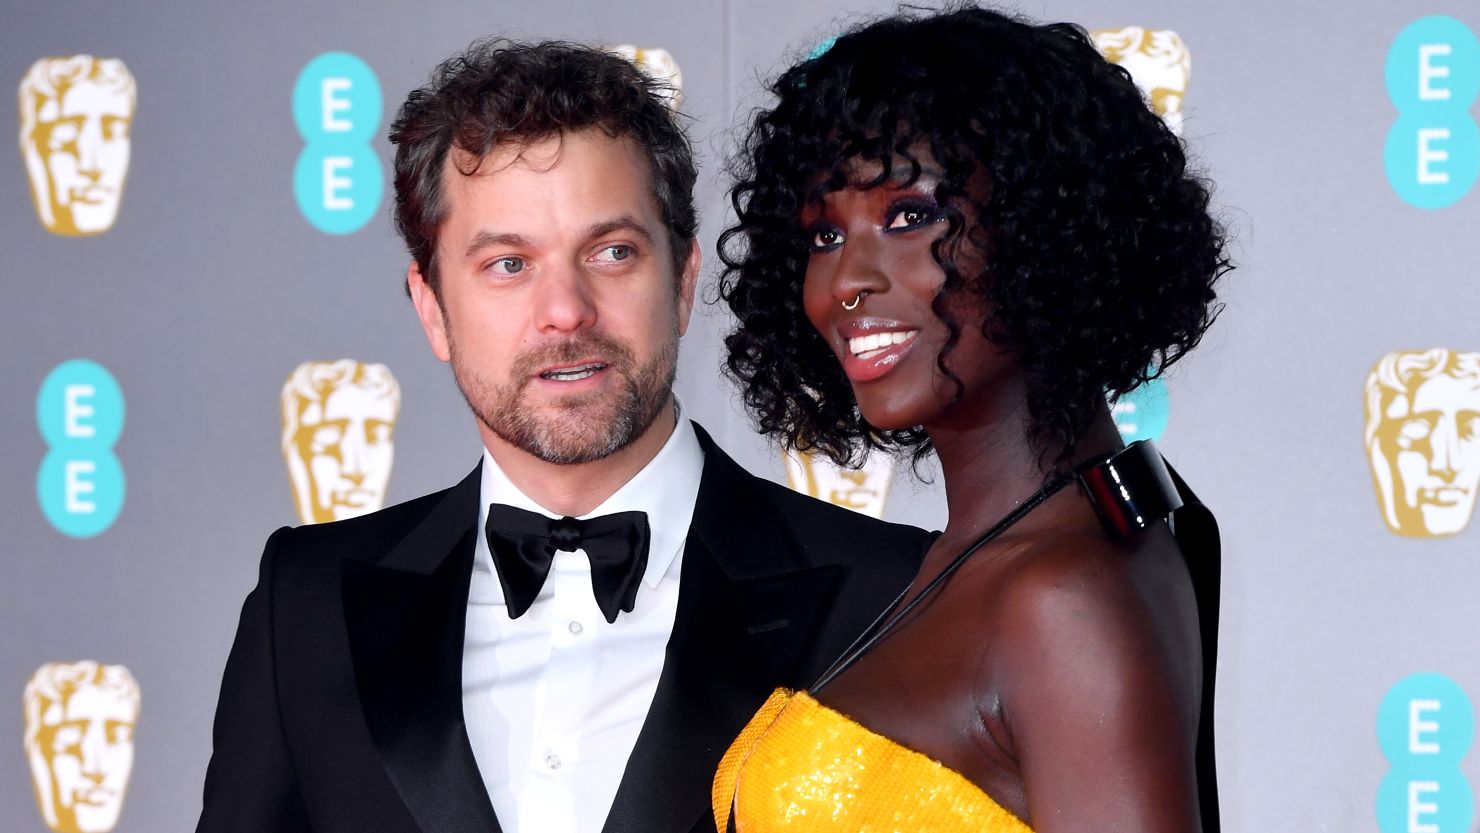 Joshua Jackson and Jodie Turner-Smith at the British Academy Film Awards, in London,
February 2, 2020.